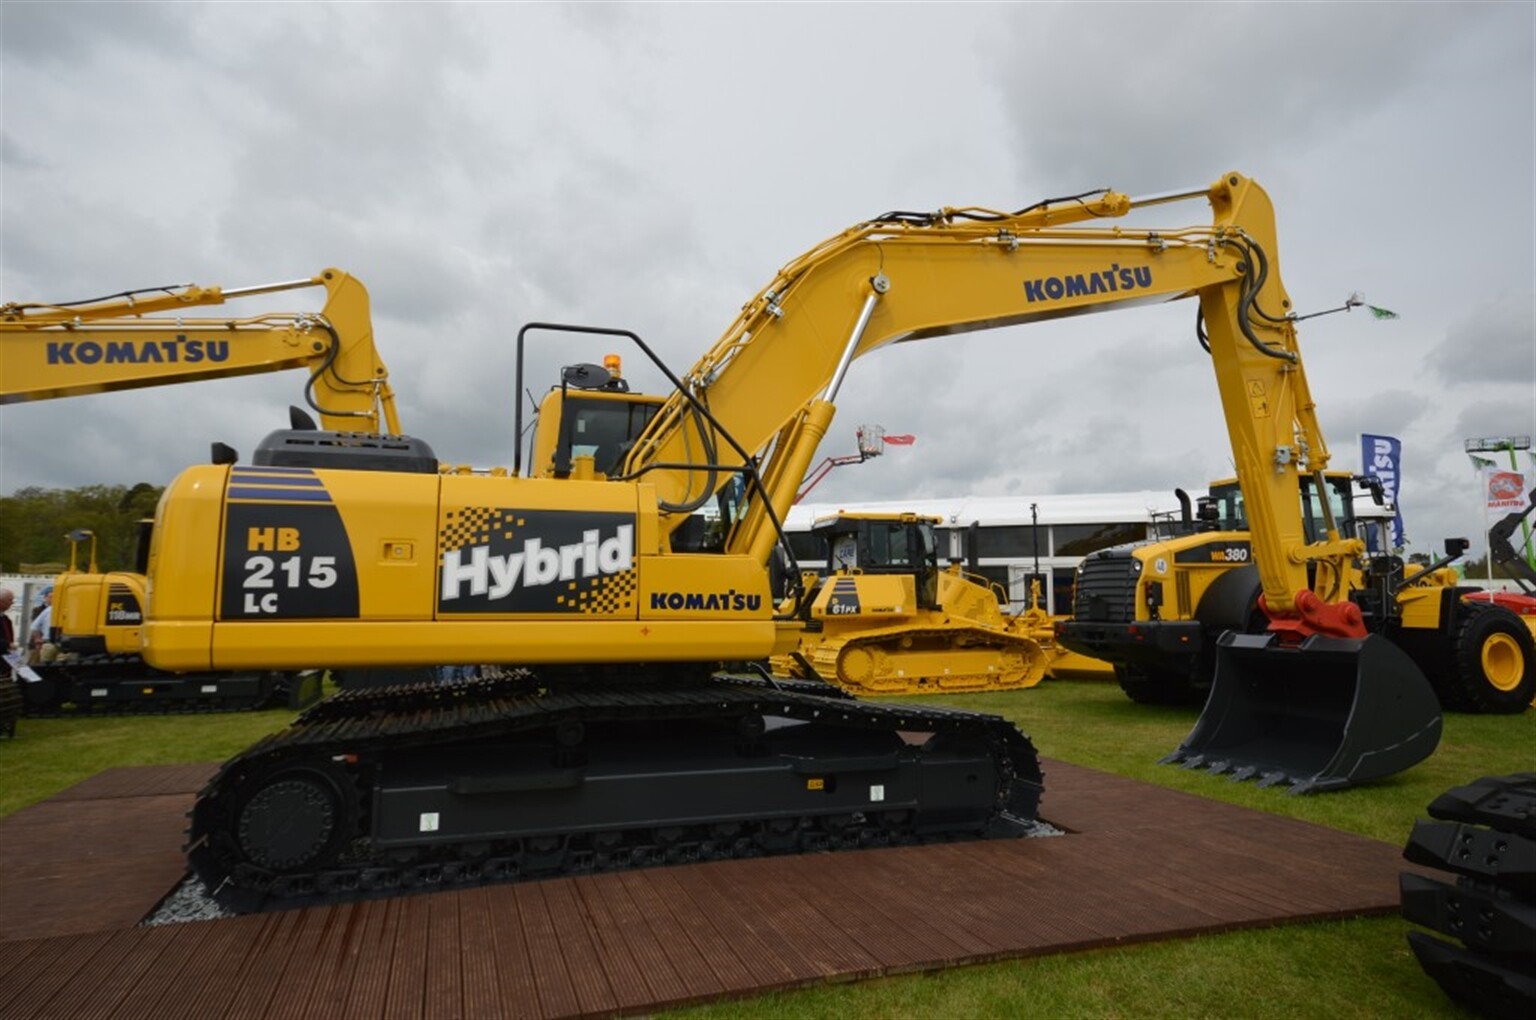 Digger set for a Hybrid experience